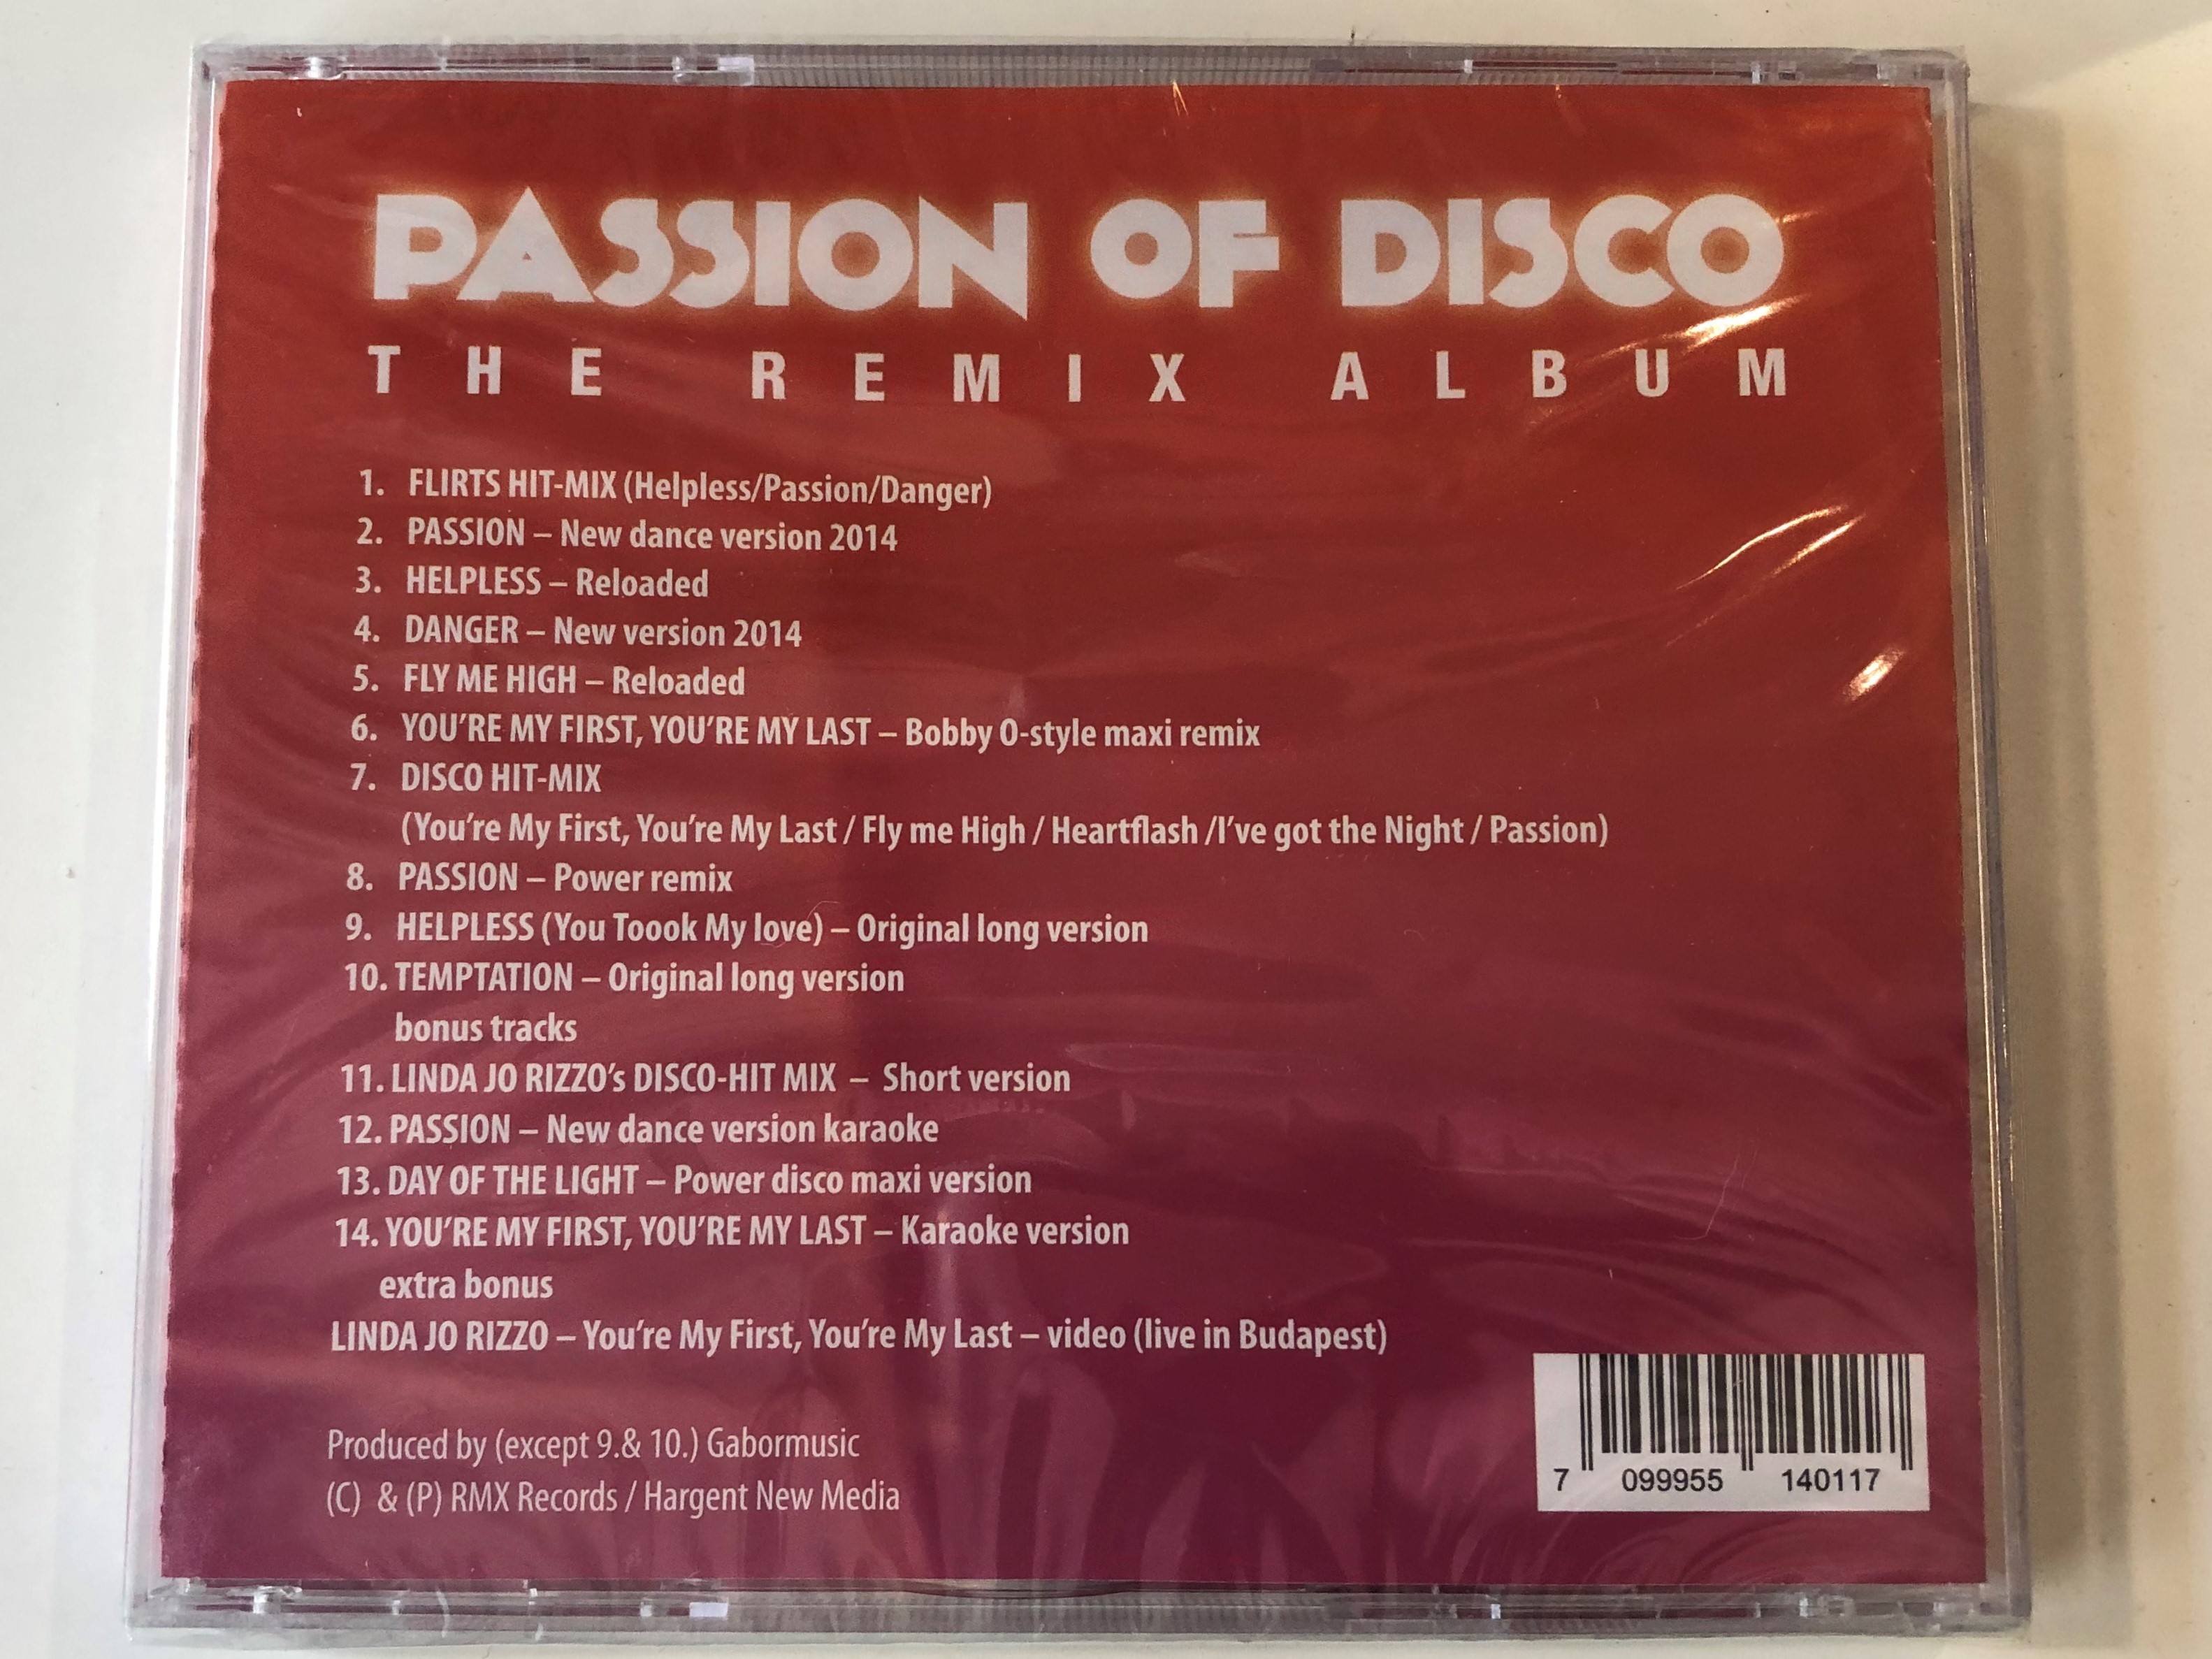 the-flirts-feat.-linda-jo-rizzo-passion-of-disco-the-remix-album-14-tracks-video-including-new-versions-of-passion-helpless-danger-exclusive-remixes-hit-mixes-karaoke-versions-.jpg